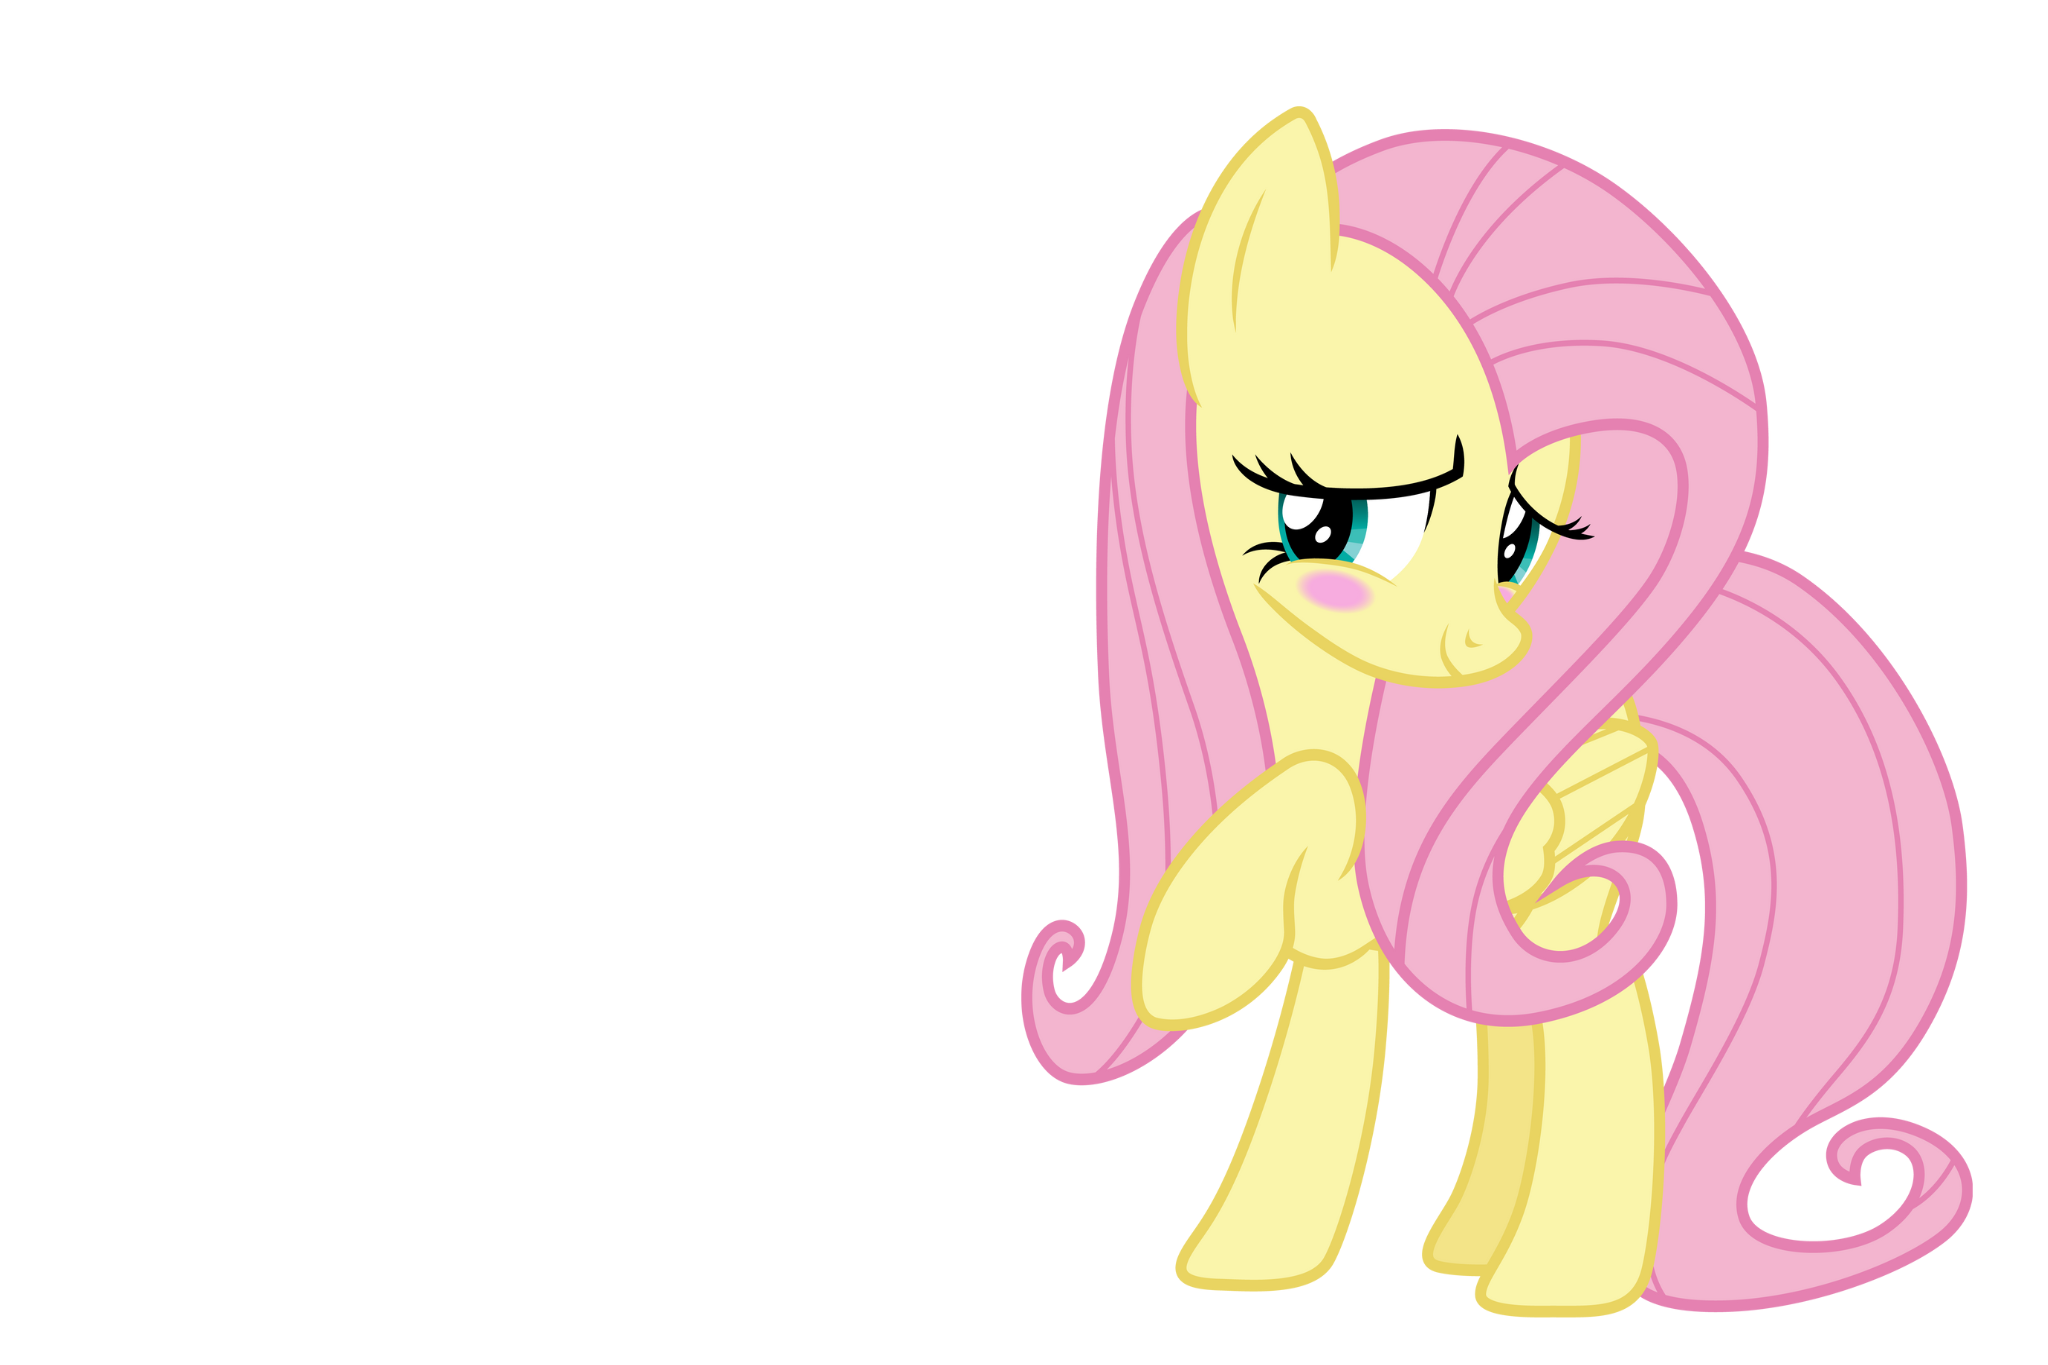 High Quality Fluttershy Blushing at Someone Blank Meme Template